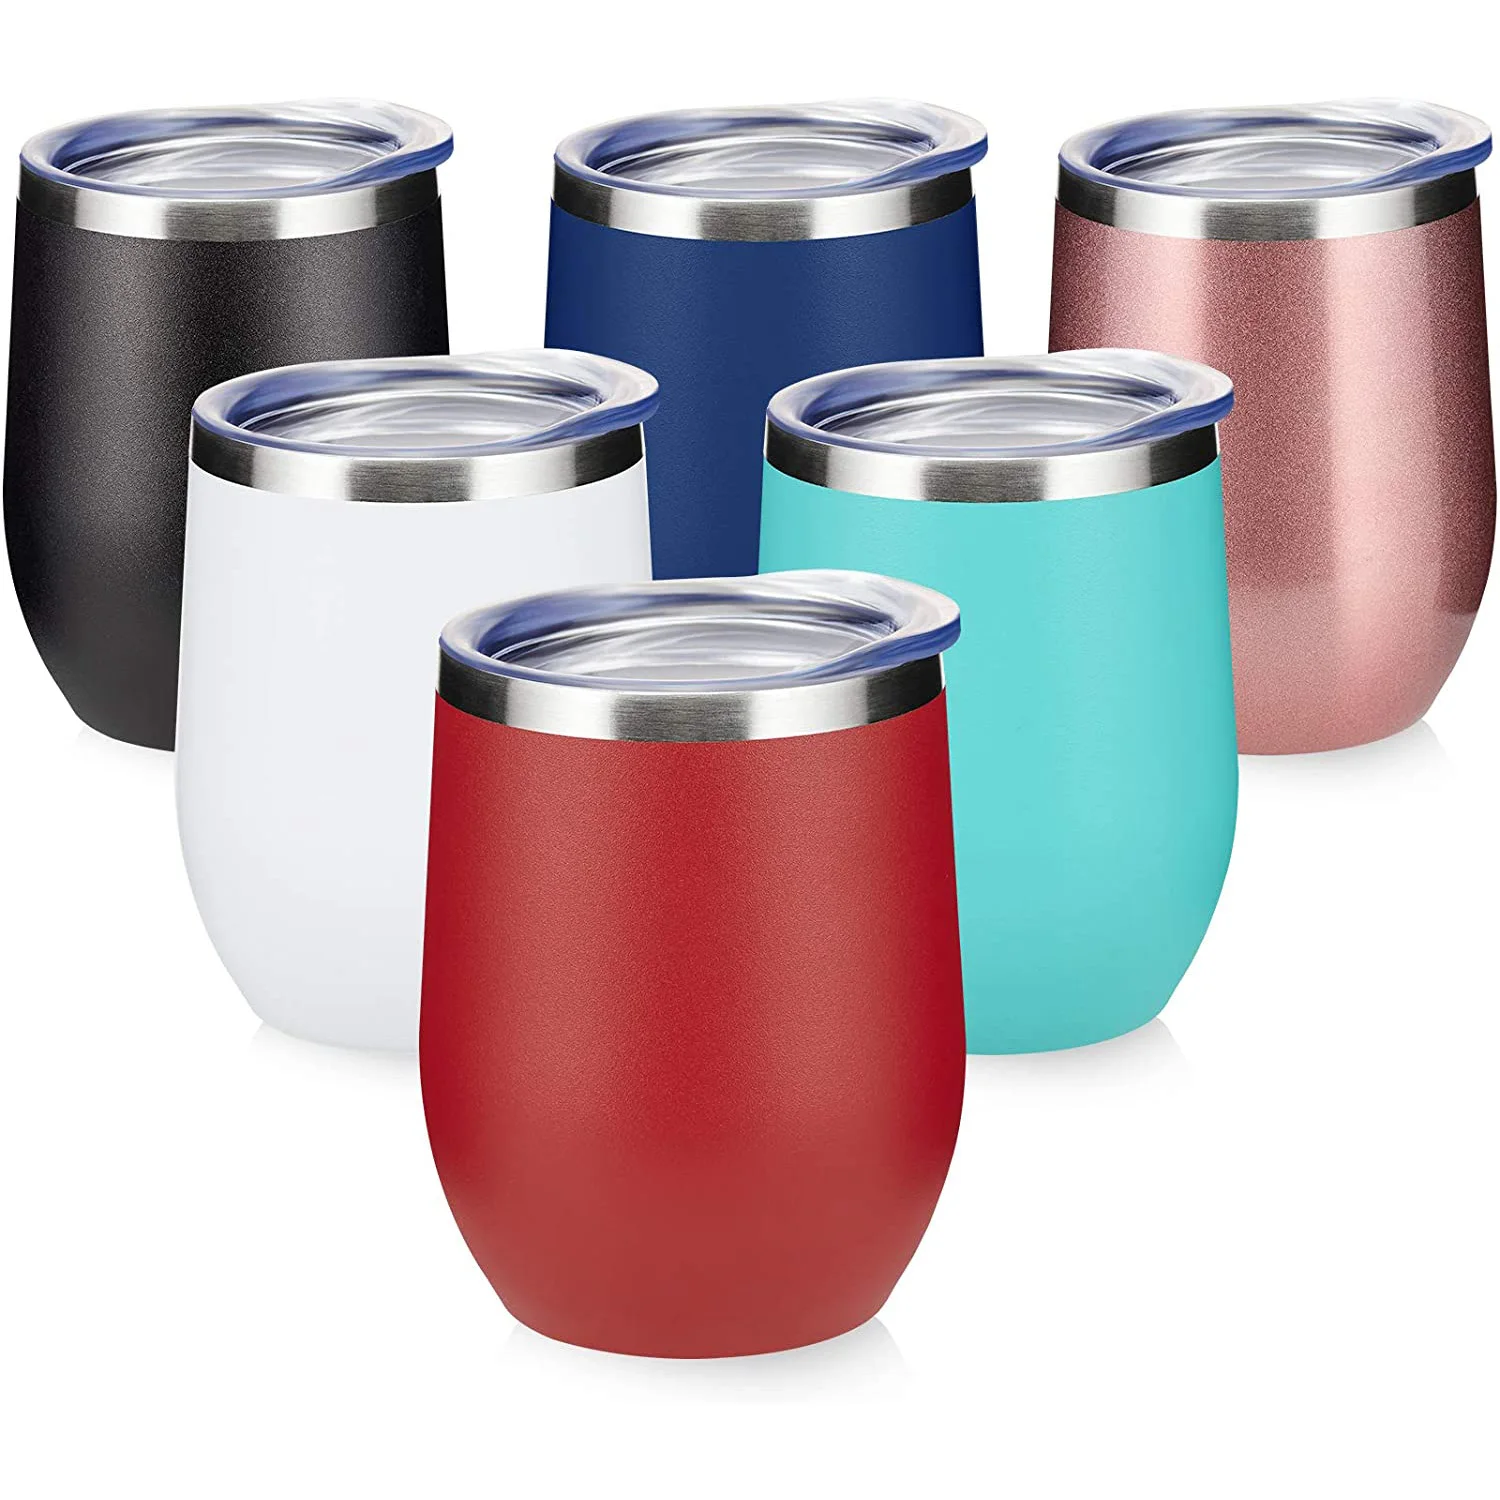 For Champaign Stainless Steel Insulated Wine Tumbler With Lid,12 oz,Double Wall Vacuum Insulated Cup Beer,Coffee,Drinks,BPA Free 12 oz 1 pc, Aqua Blue Cocktail 